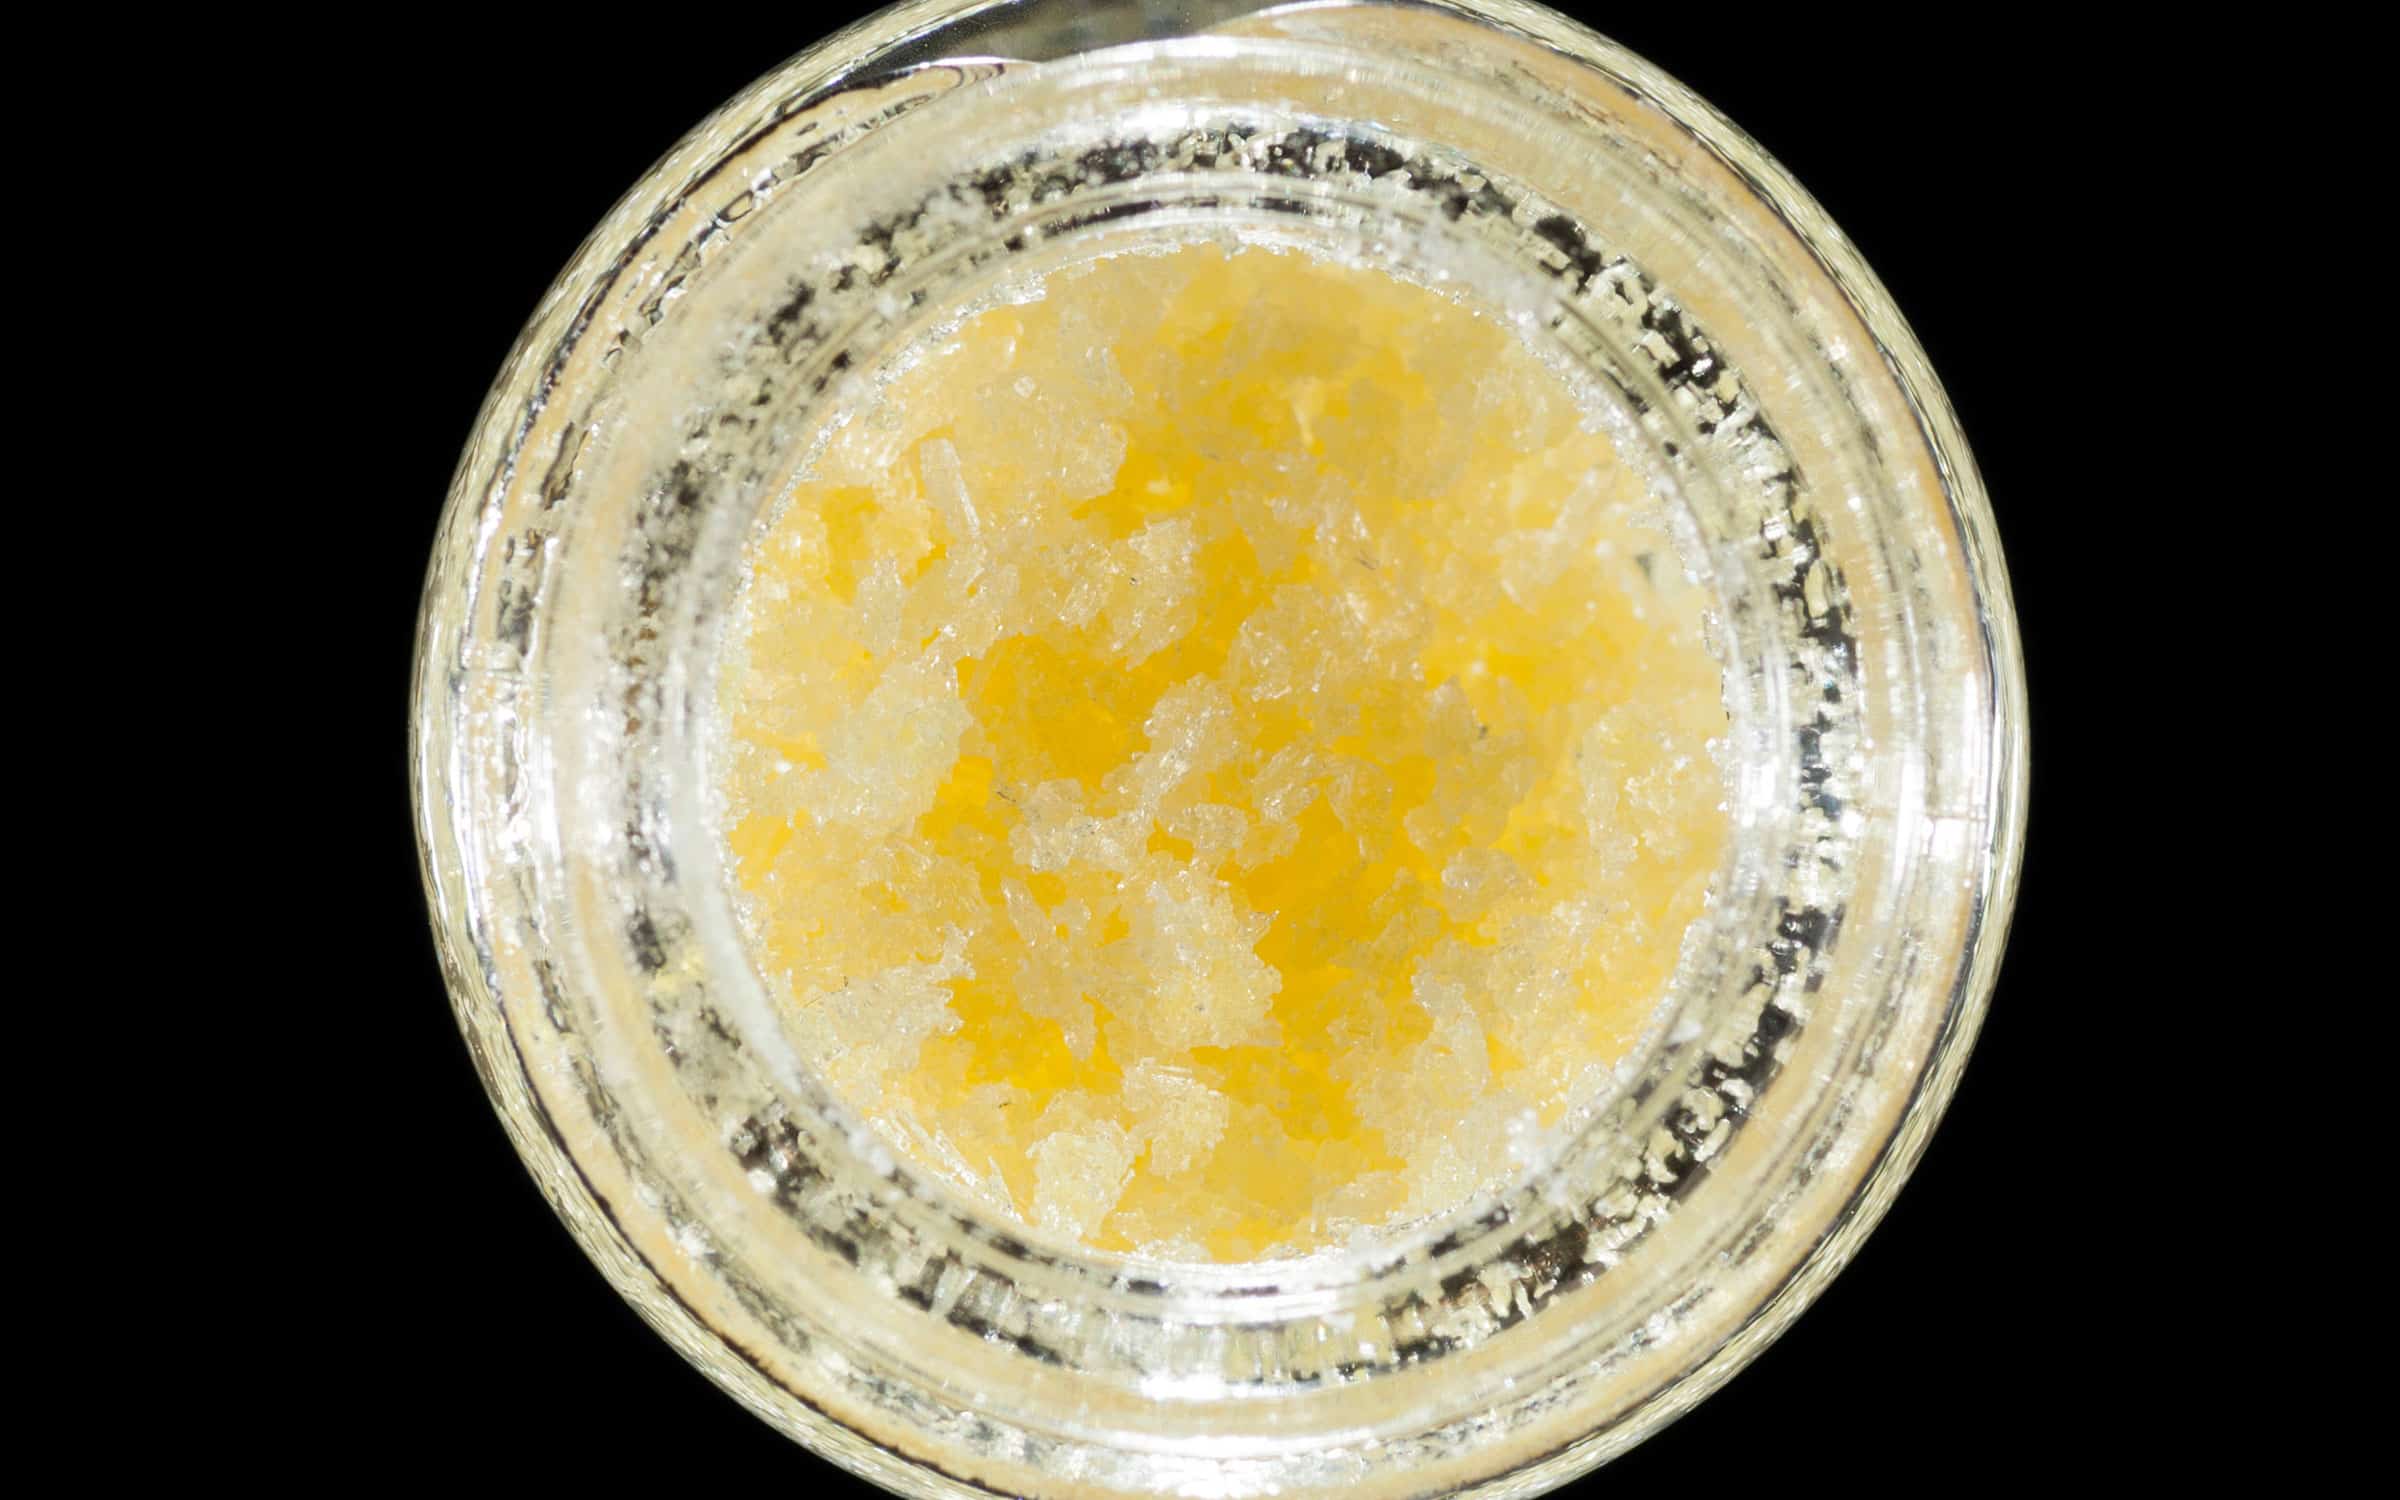 FLORIDA CBD CONCENTRATES - Cbd|Concentrates|Products|Concentrate|Hemp|Shatter|Wax|Isolate|Product|Thc|Terpenes|Oil|Effects|Cannabis|Cannabinoids|Spectrum|Plant|Form|Way|Pure|Extract|Powder|Crystals|Dab|Process|Extraction|Flower|People|Benefits|Vape|Body|Experience|Resin|Quality|Waxes|Health|Time|Potency|Amount|Forms|Cbd Concentrates|Cbd Concentrate|Cbd Wax|Cbd Shatter|Cbd Products|Cbd Isolate|Dab Rig|Cannabis Plant|Live Resin|Hemp Plant|Cbd Waxes|Free Shipping|Cbd Oil|Cbd Crystals|Tweedle Farms|Cbd Dabs|Full Spectrum Cbd|Dab Pen|Extraction Process|Daily Basis|Cbd Isolates|Entourage Effect|Scientific Hemp Oil®|Blue Moon Hemp|Cbd Oil Solutions|Pure Cbd Isolate|Pure Cbd|Small Amount|United States|Cbd Flower